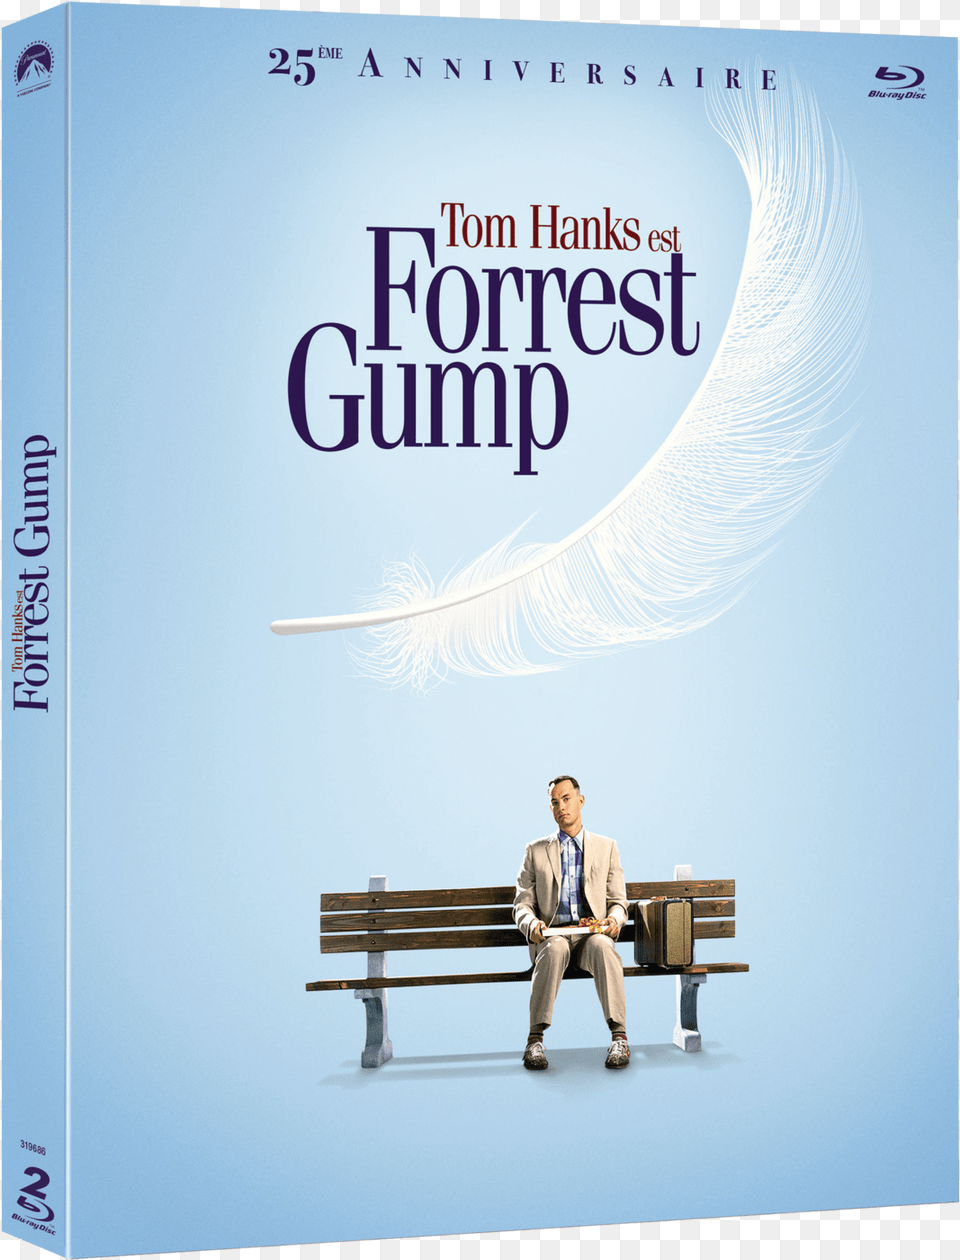 Revue Cinema Blu Ray Forrest Gump Edition 25me Anniversaire Forrest Gump 4k Blu Ray, Furniture, Bench, Person, Man Png Image